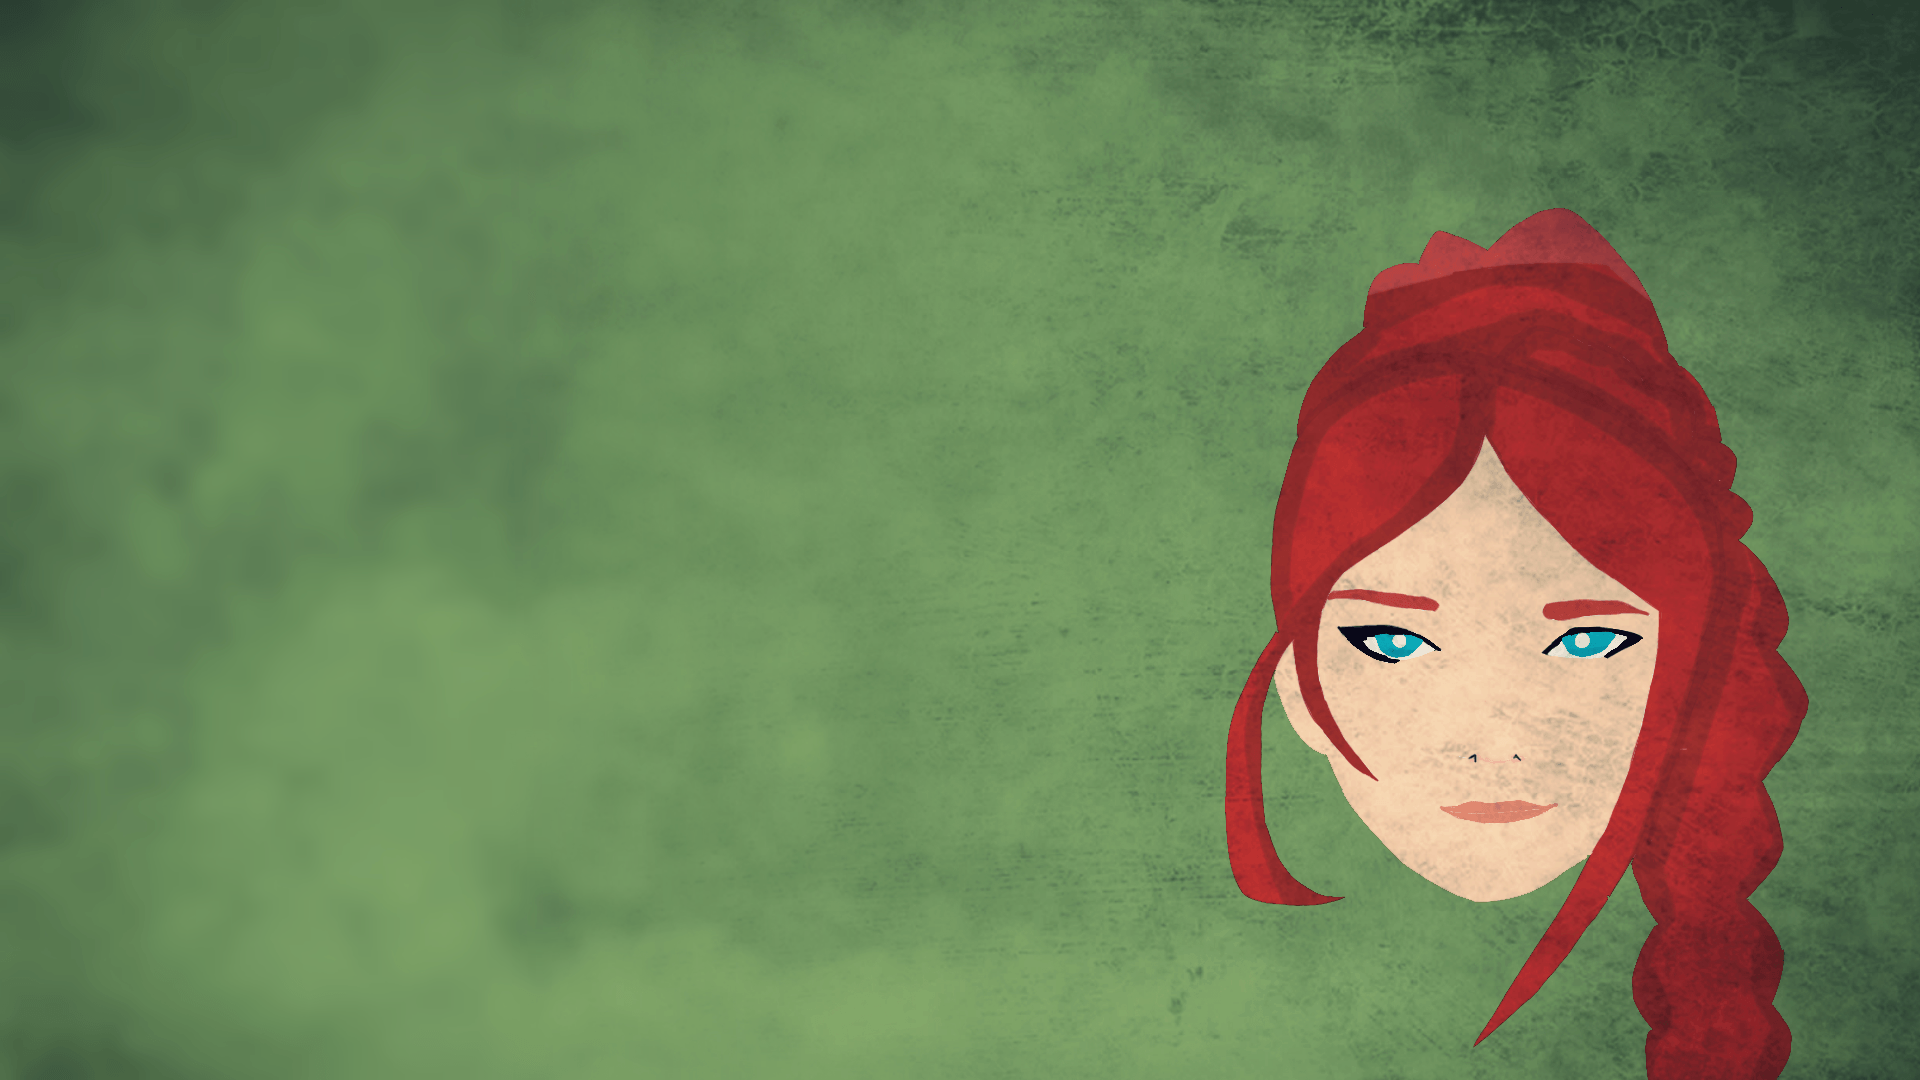 Paladins Wallpapers by Dralec